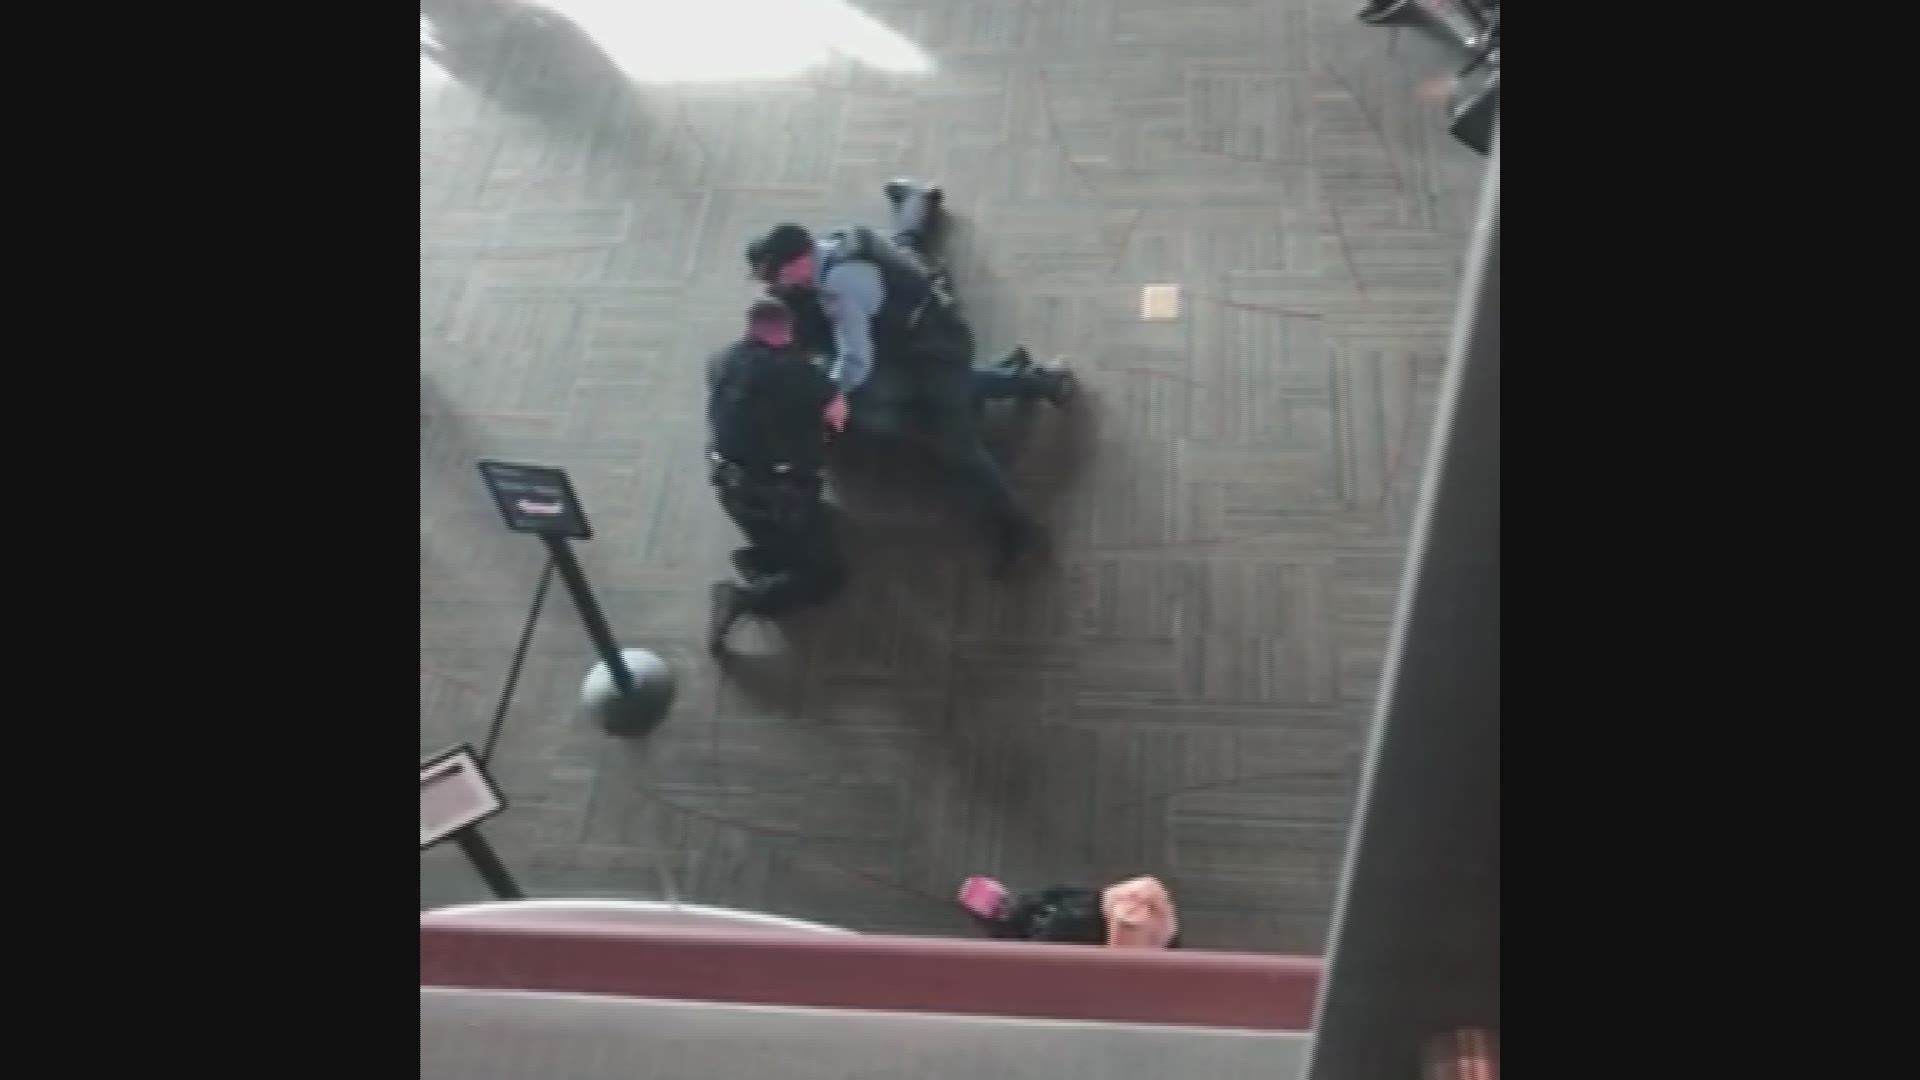 A man who police say was armed with a gun was arrested at the Medford, Oregon airport on Jan. 10, 2019. Video courtesy of Thomas Busch.